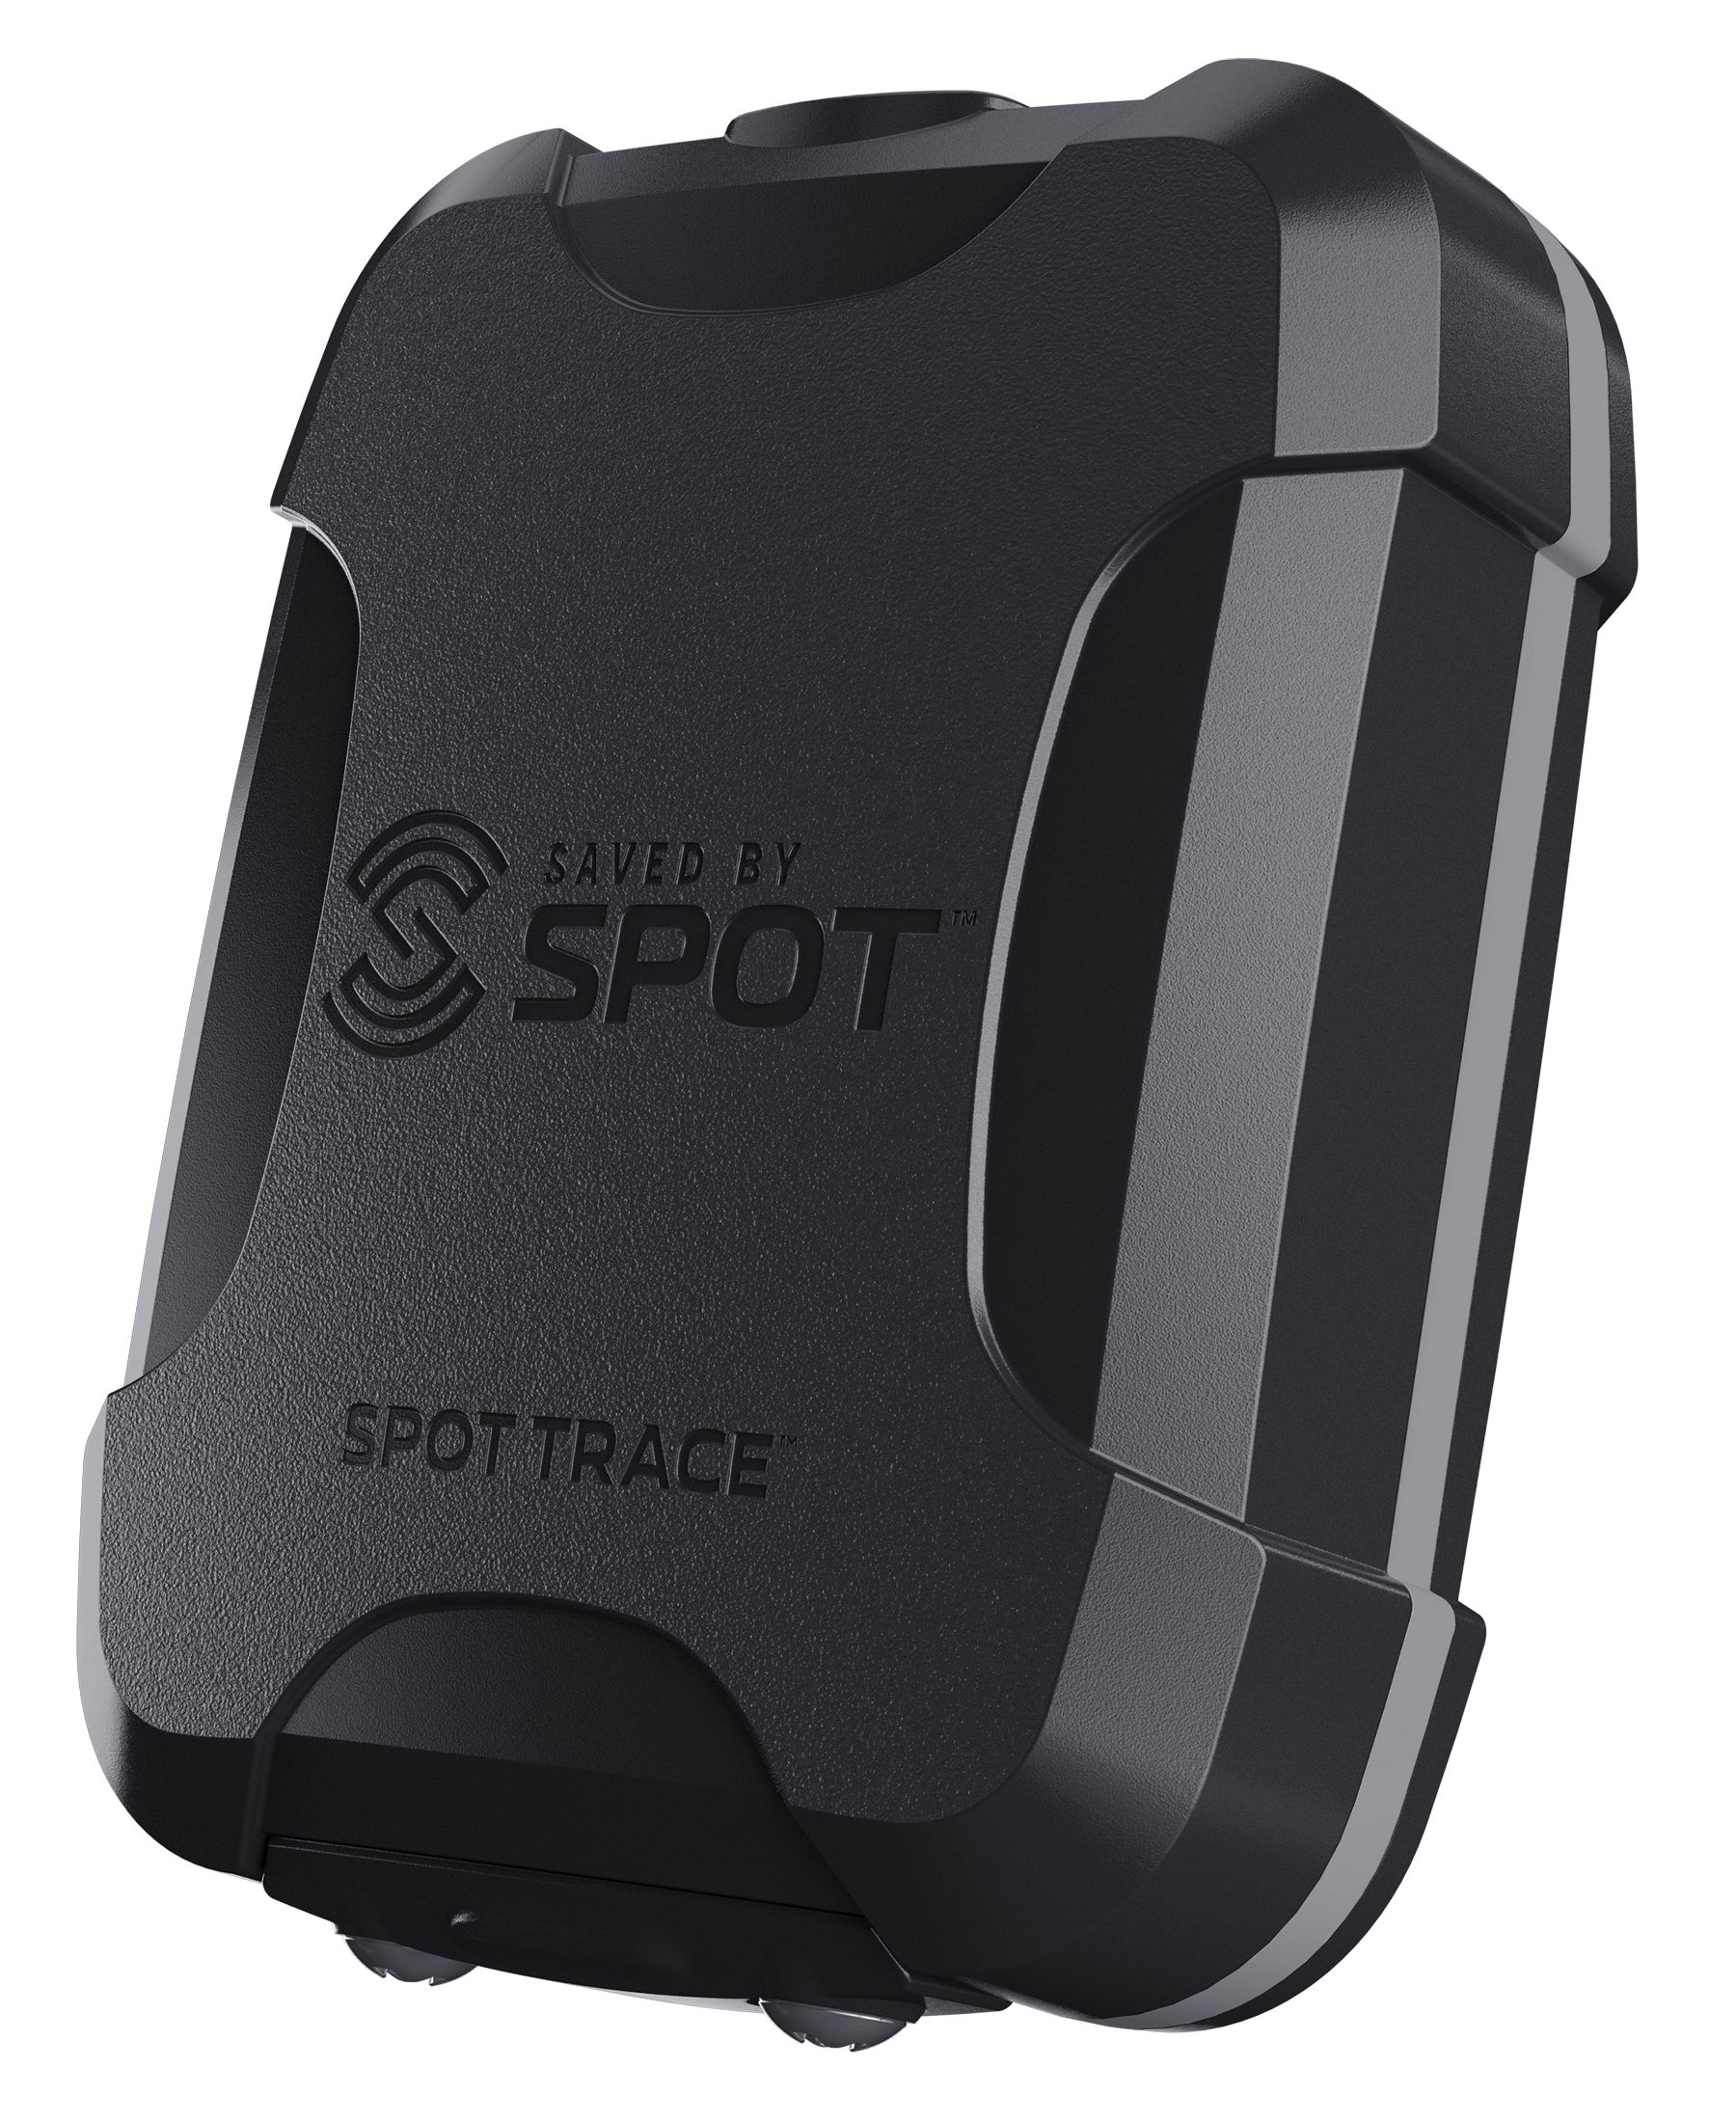 Spot Trace Satellite Tracking Device 2023 LoneStar Tracking 